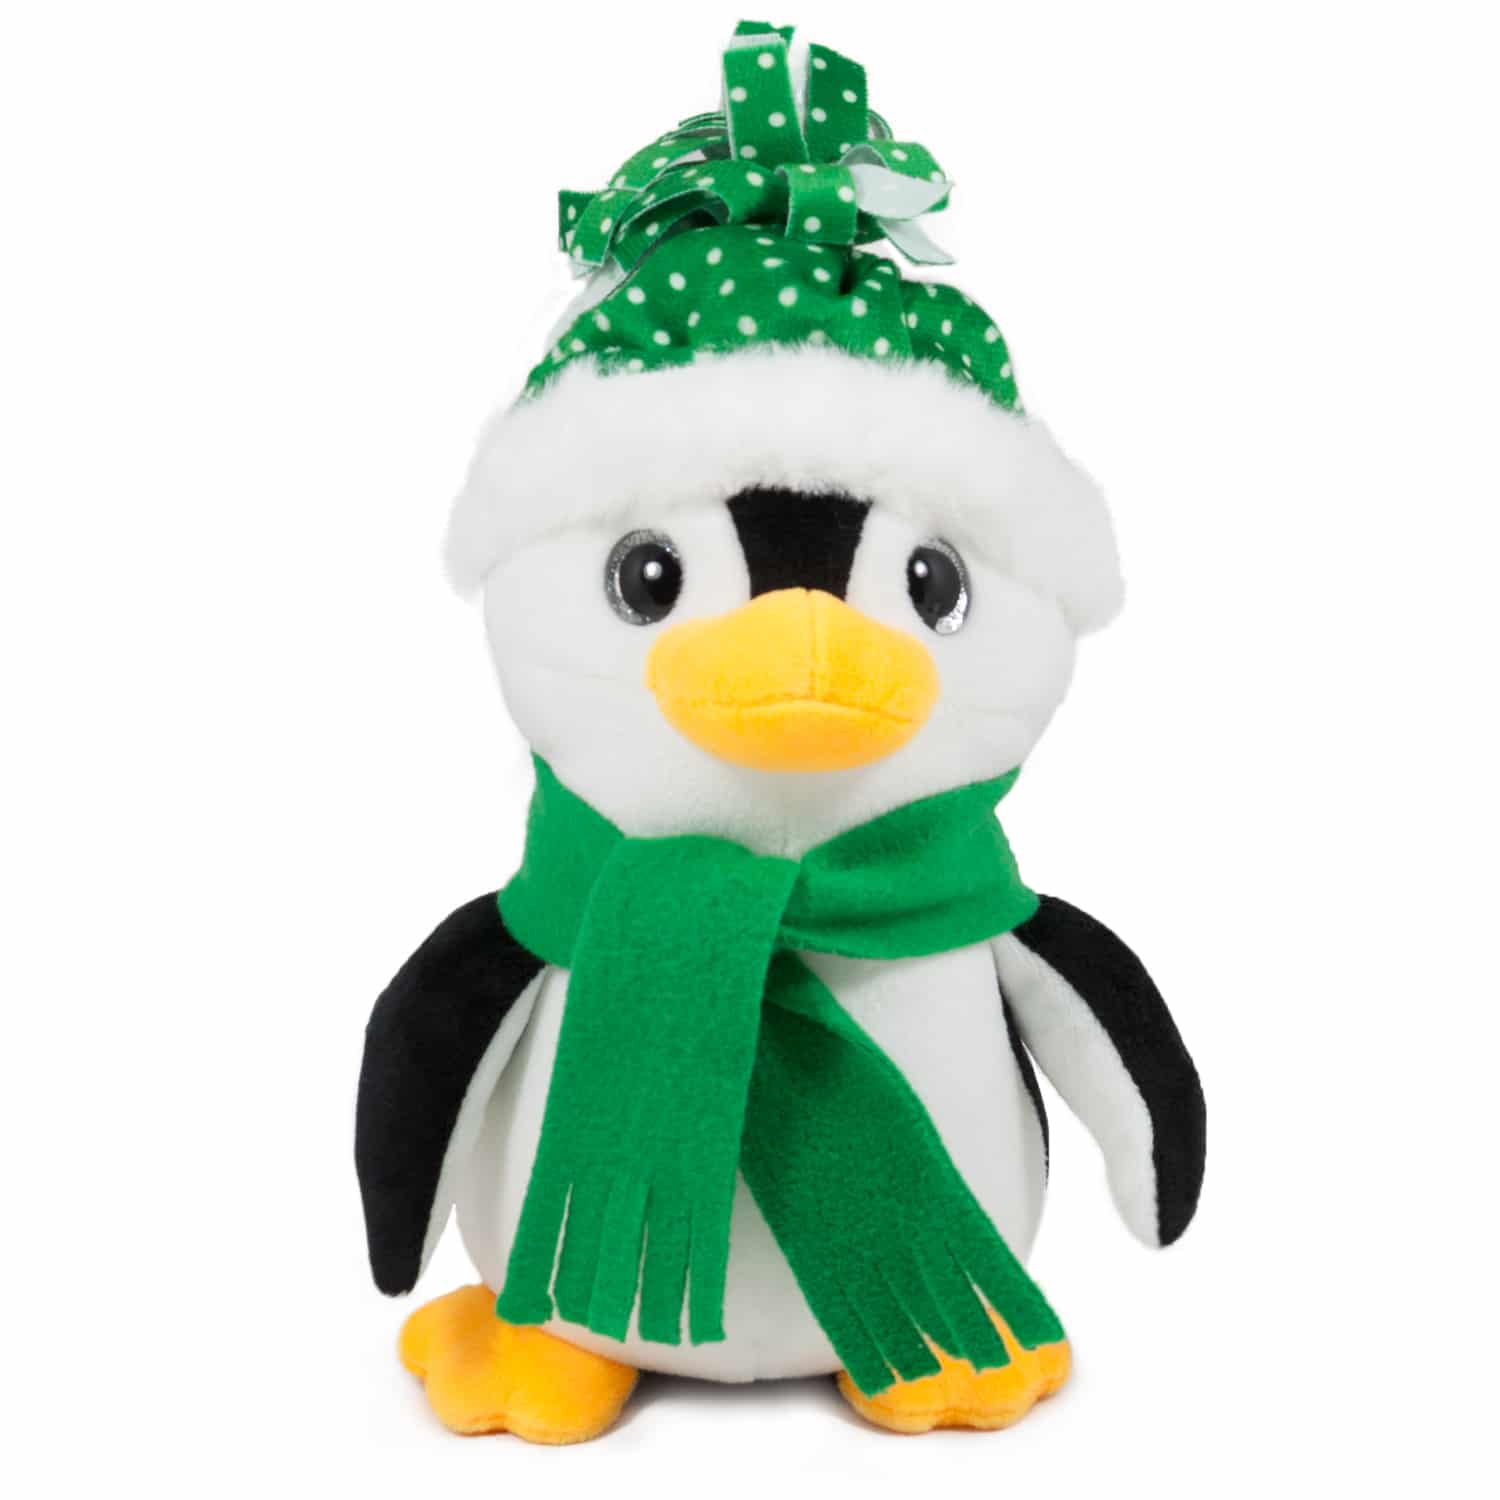 Penguin with hat and scarf - Green